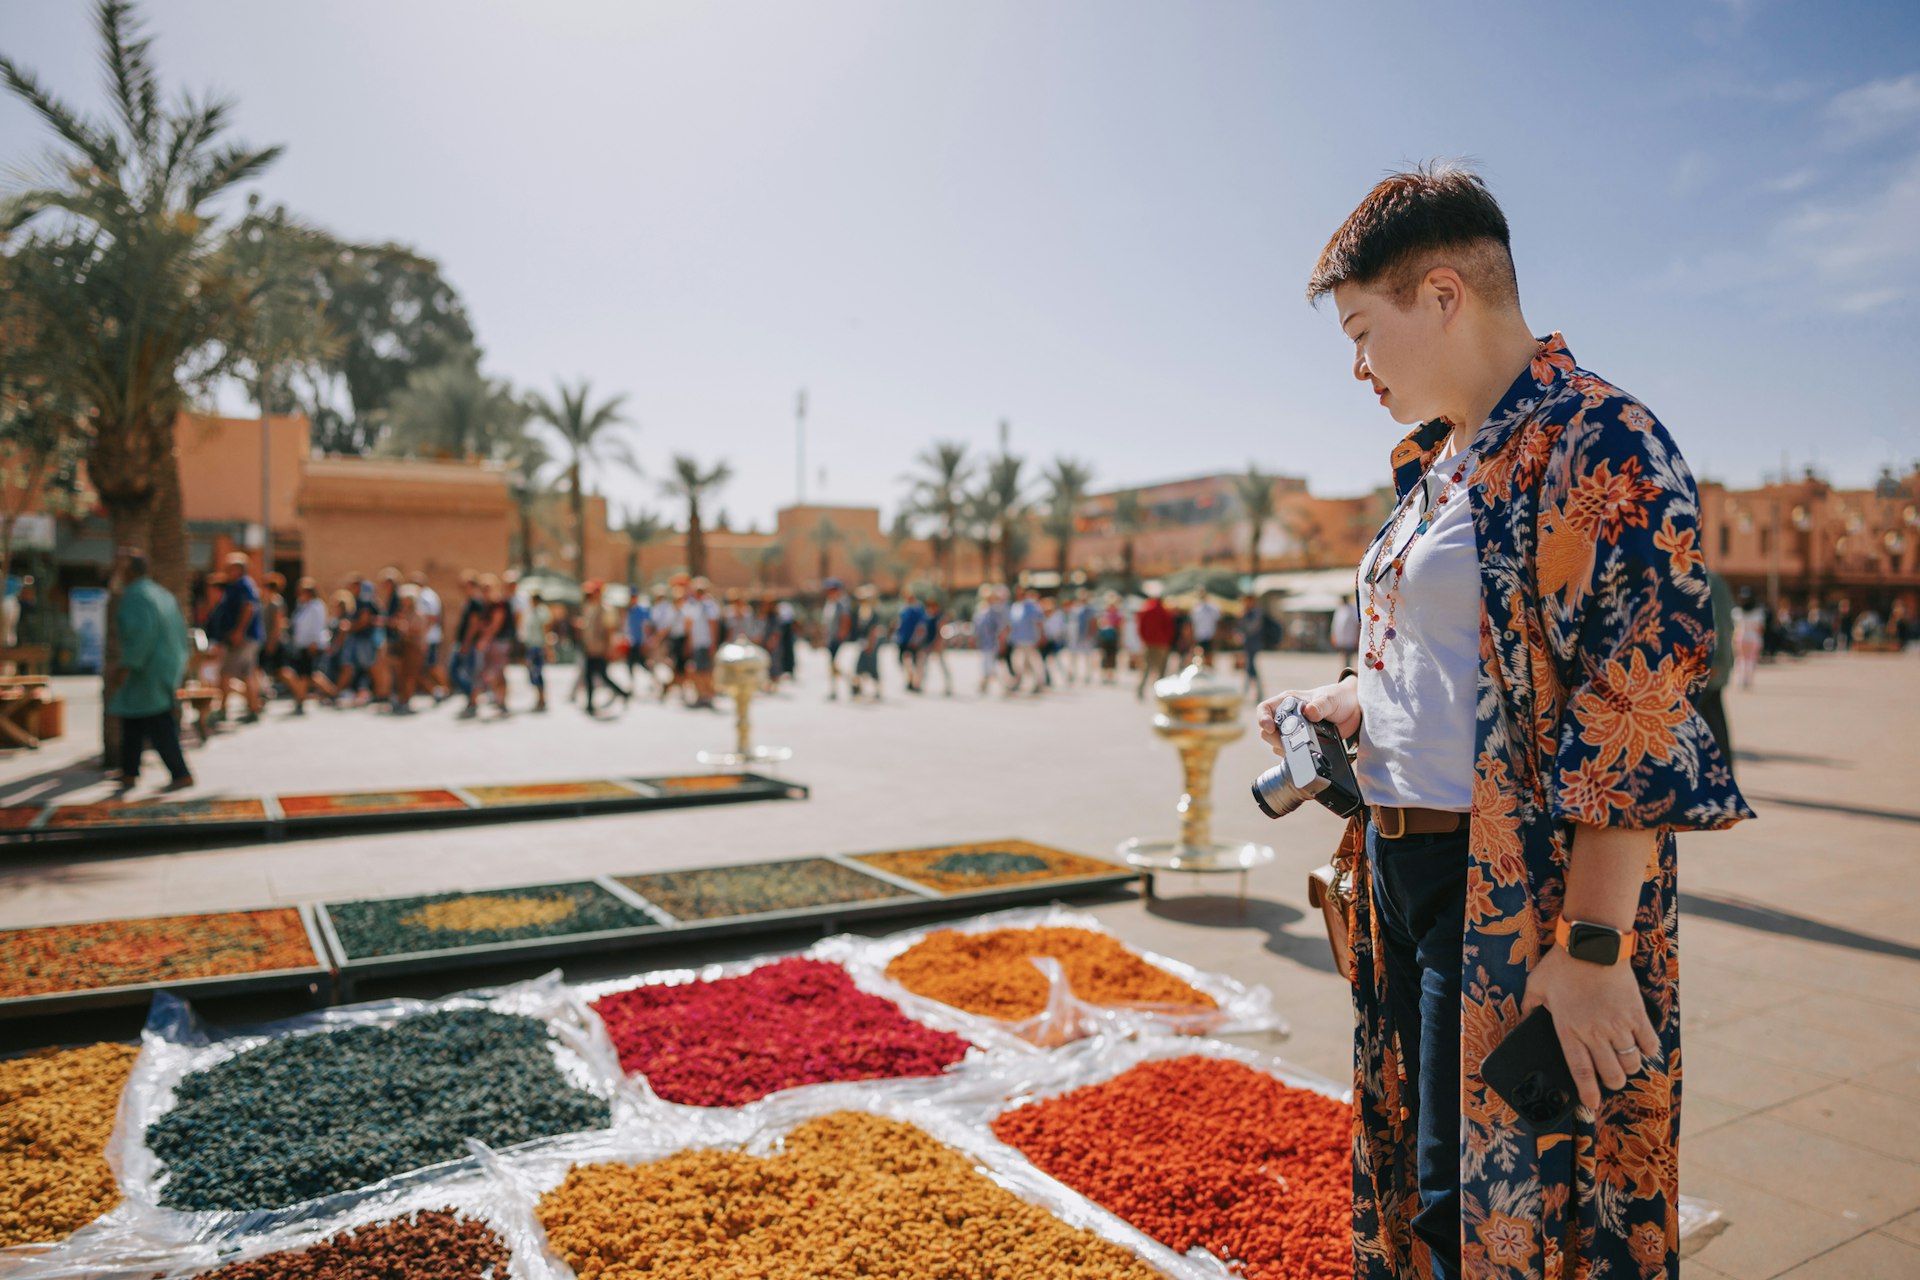 A traveler browses a stall selling dried flowers in Marrakesh, Morocco